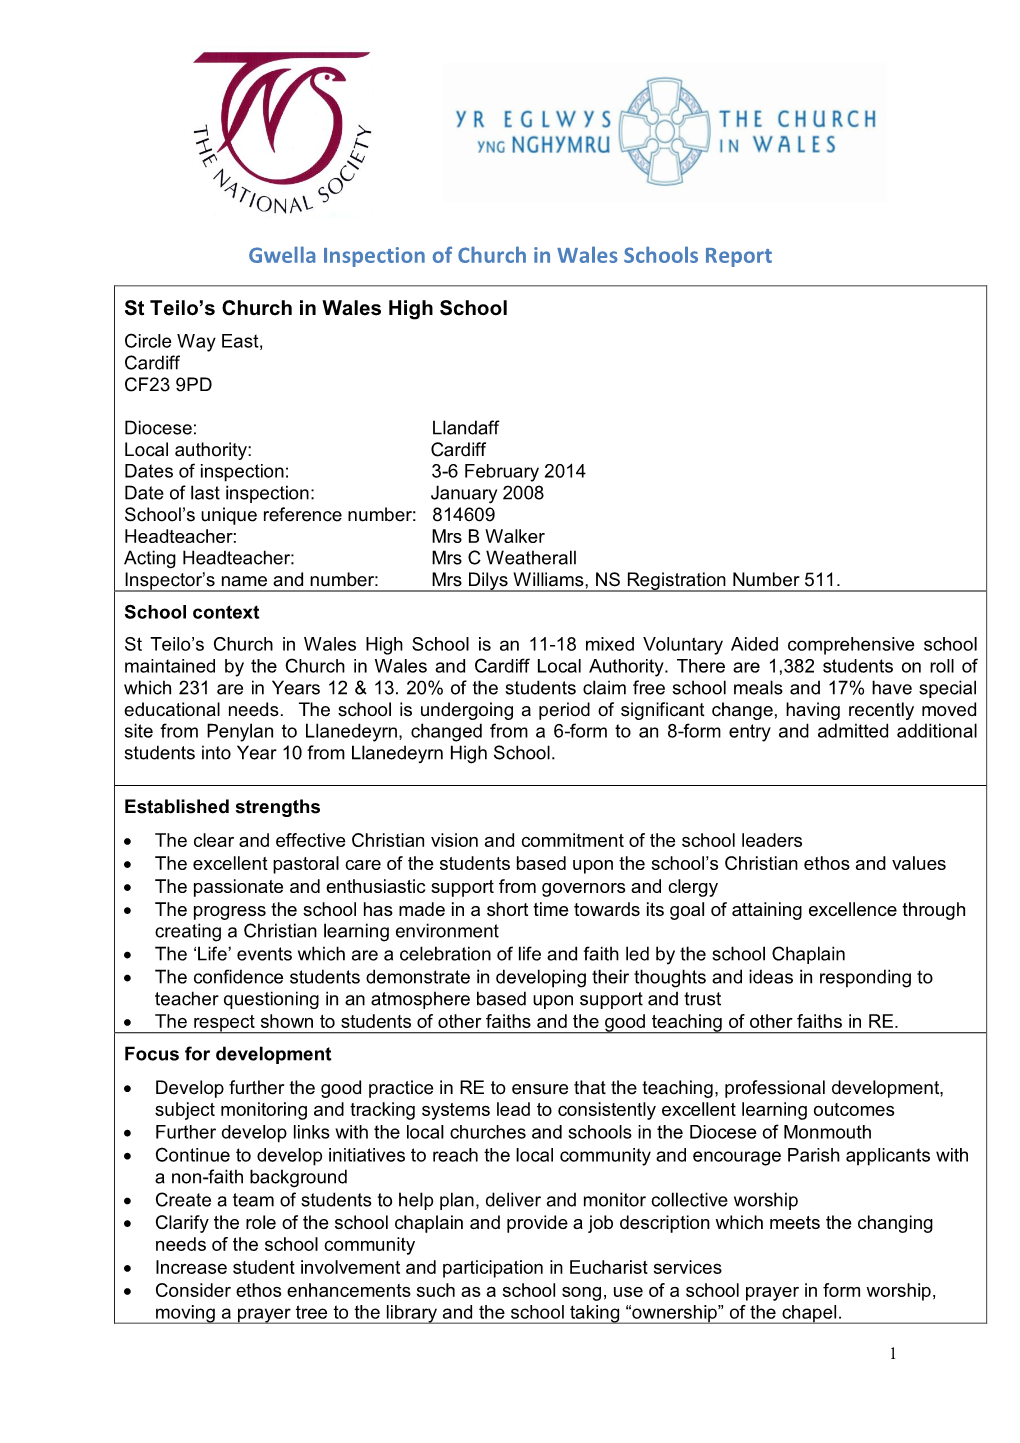 Gwella Inspection of Church in Wales Schools Report